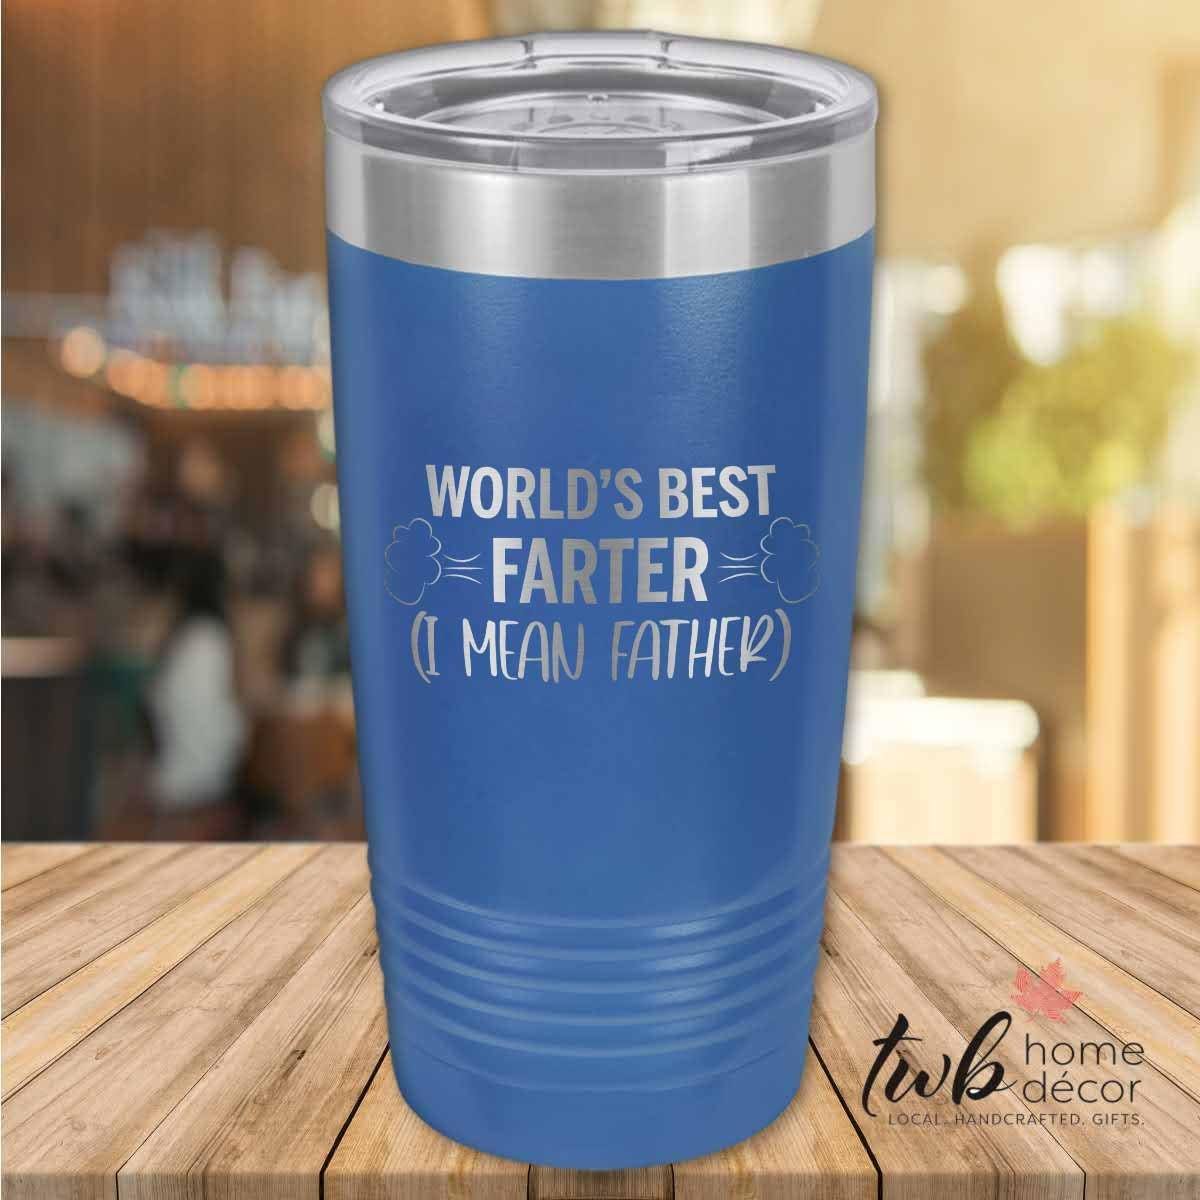 World's Best Farter (I mean Father) thermal - TWB Home Decor